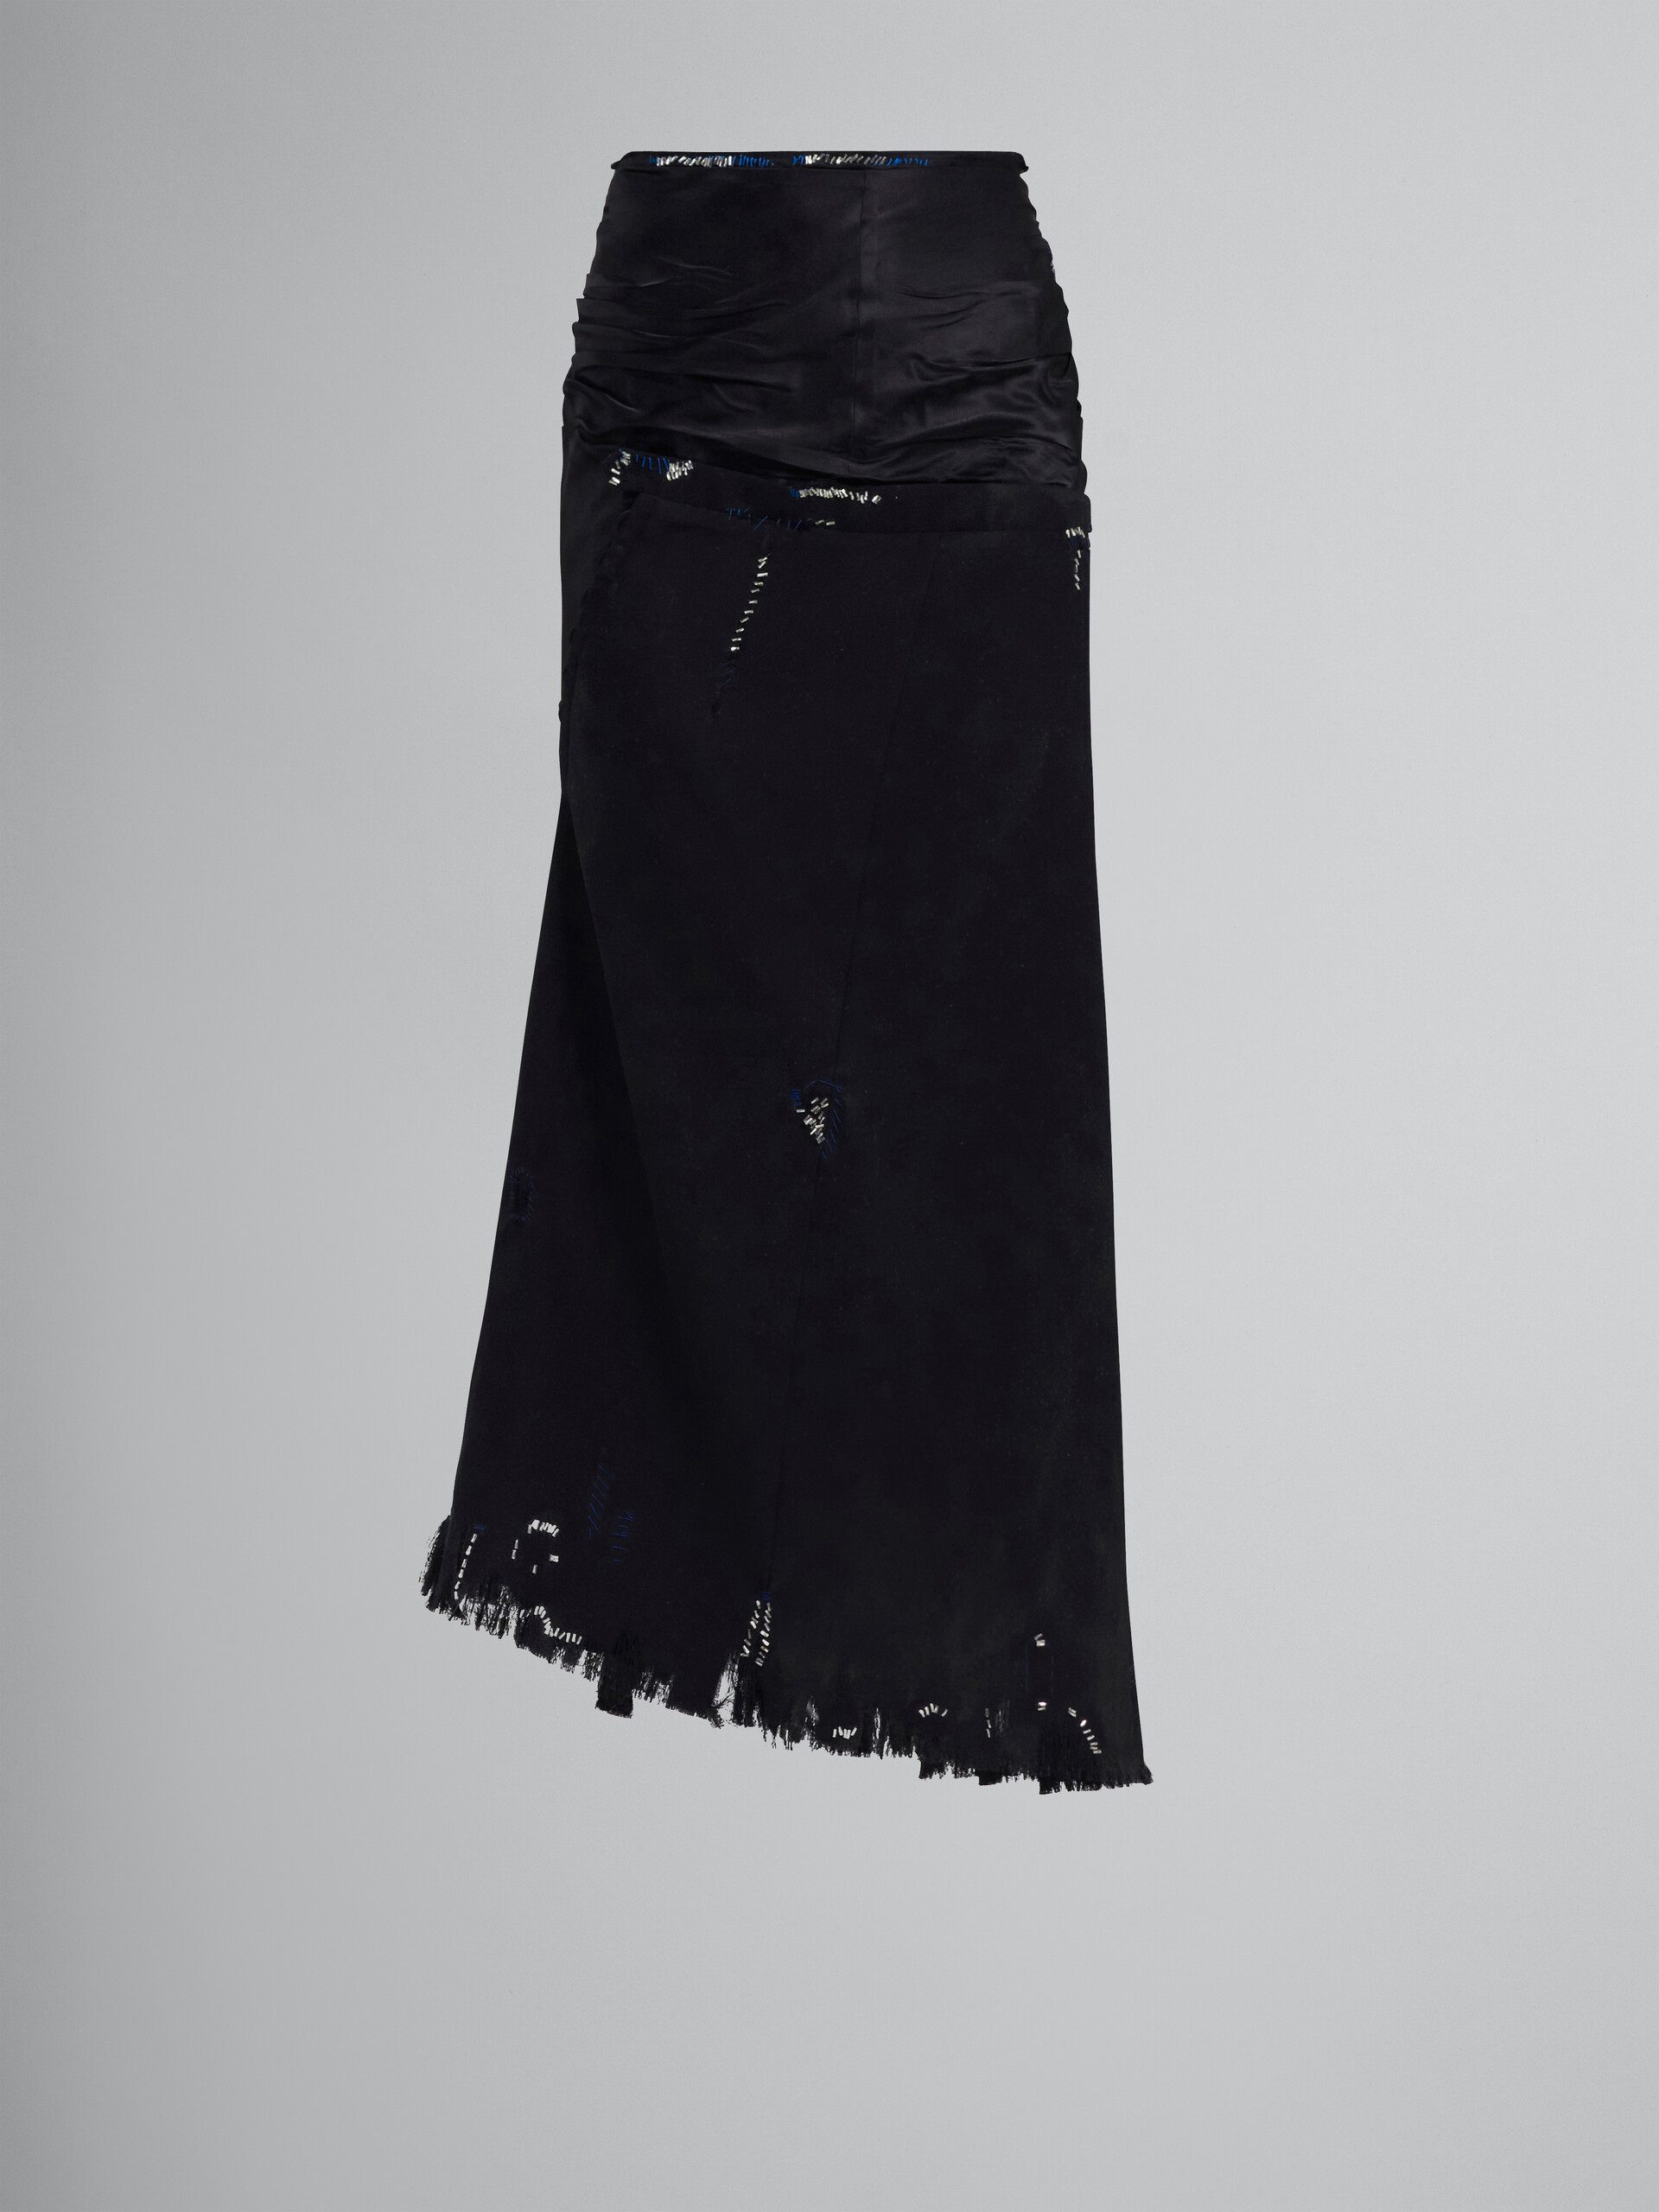 Black wool skirt with embroidery - Skirts - Image 1